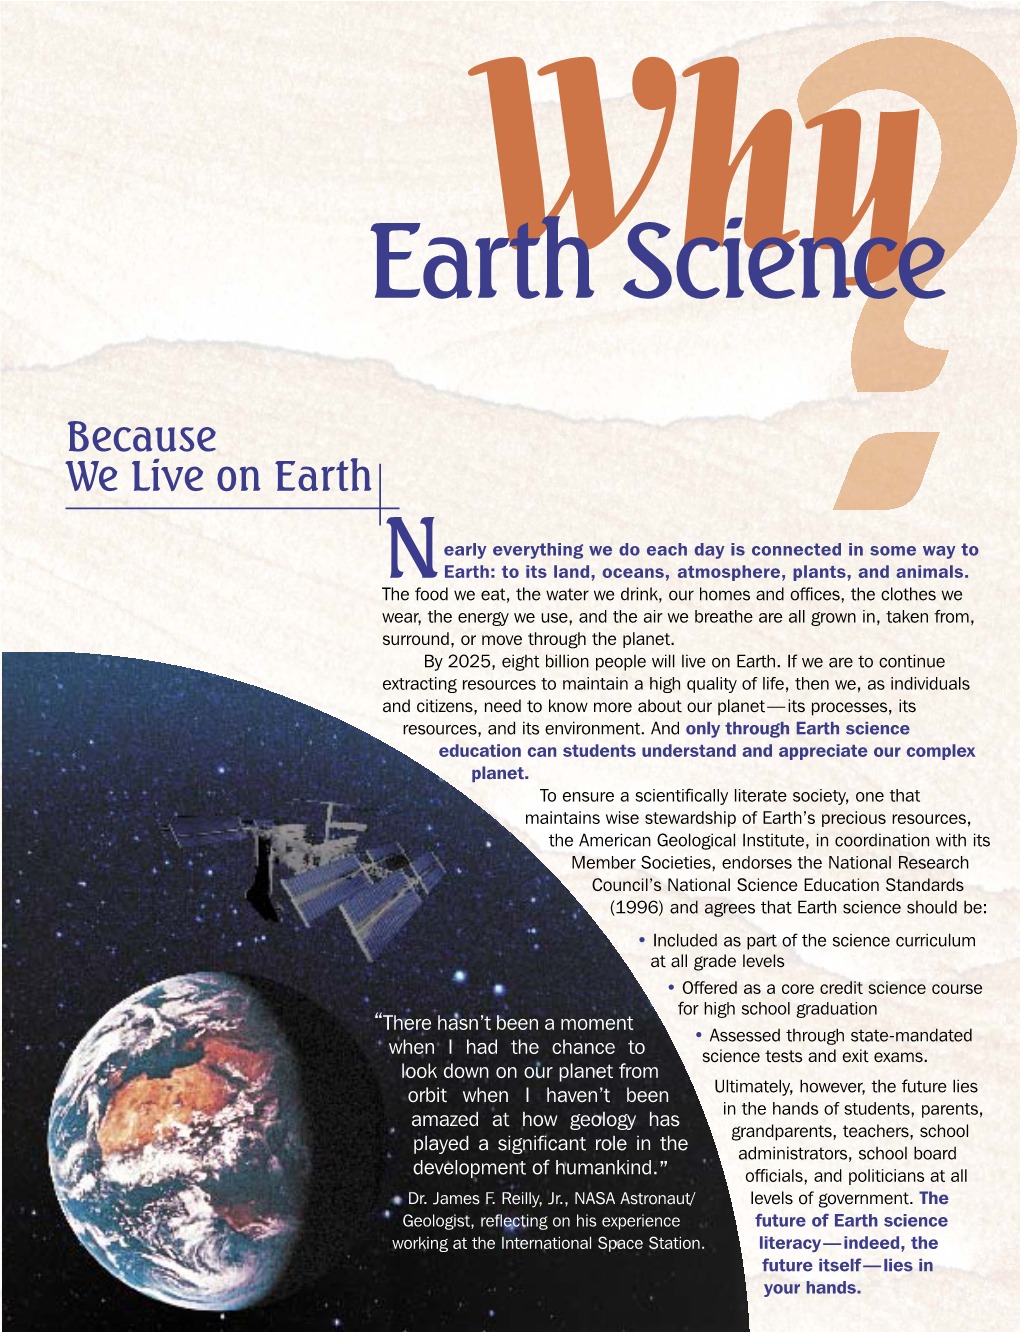 Earth Science Education Can Students Understand and Appreciate Our Complex Planet